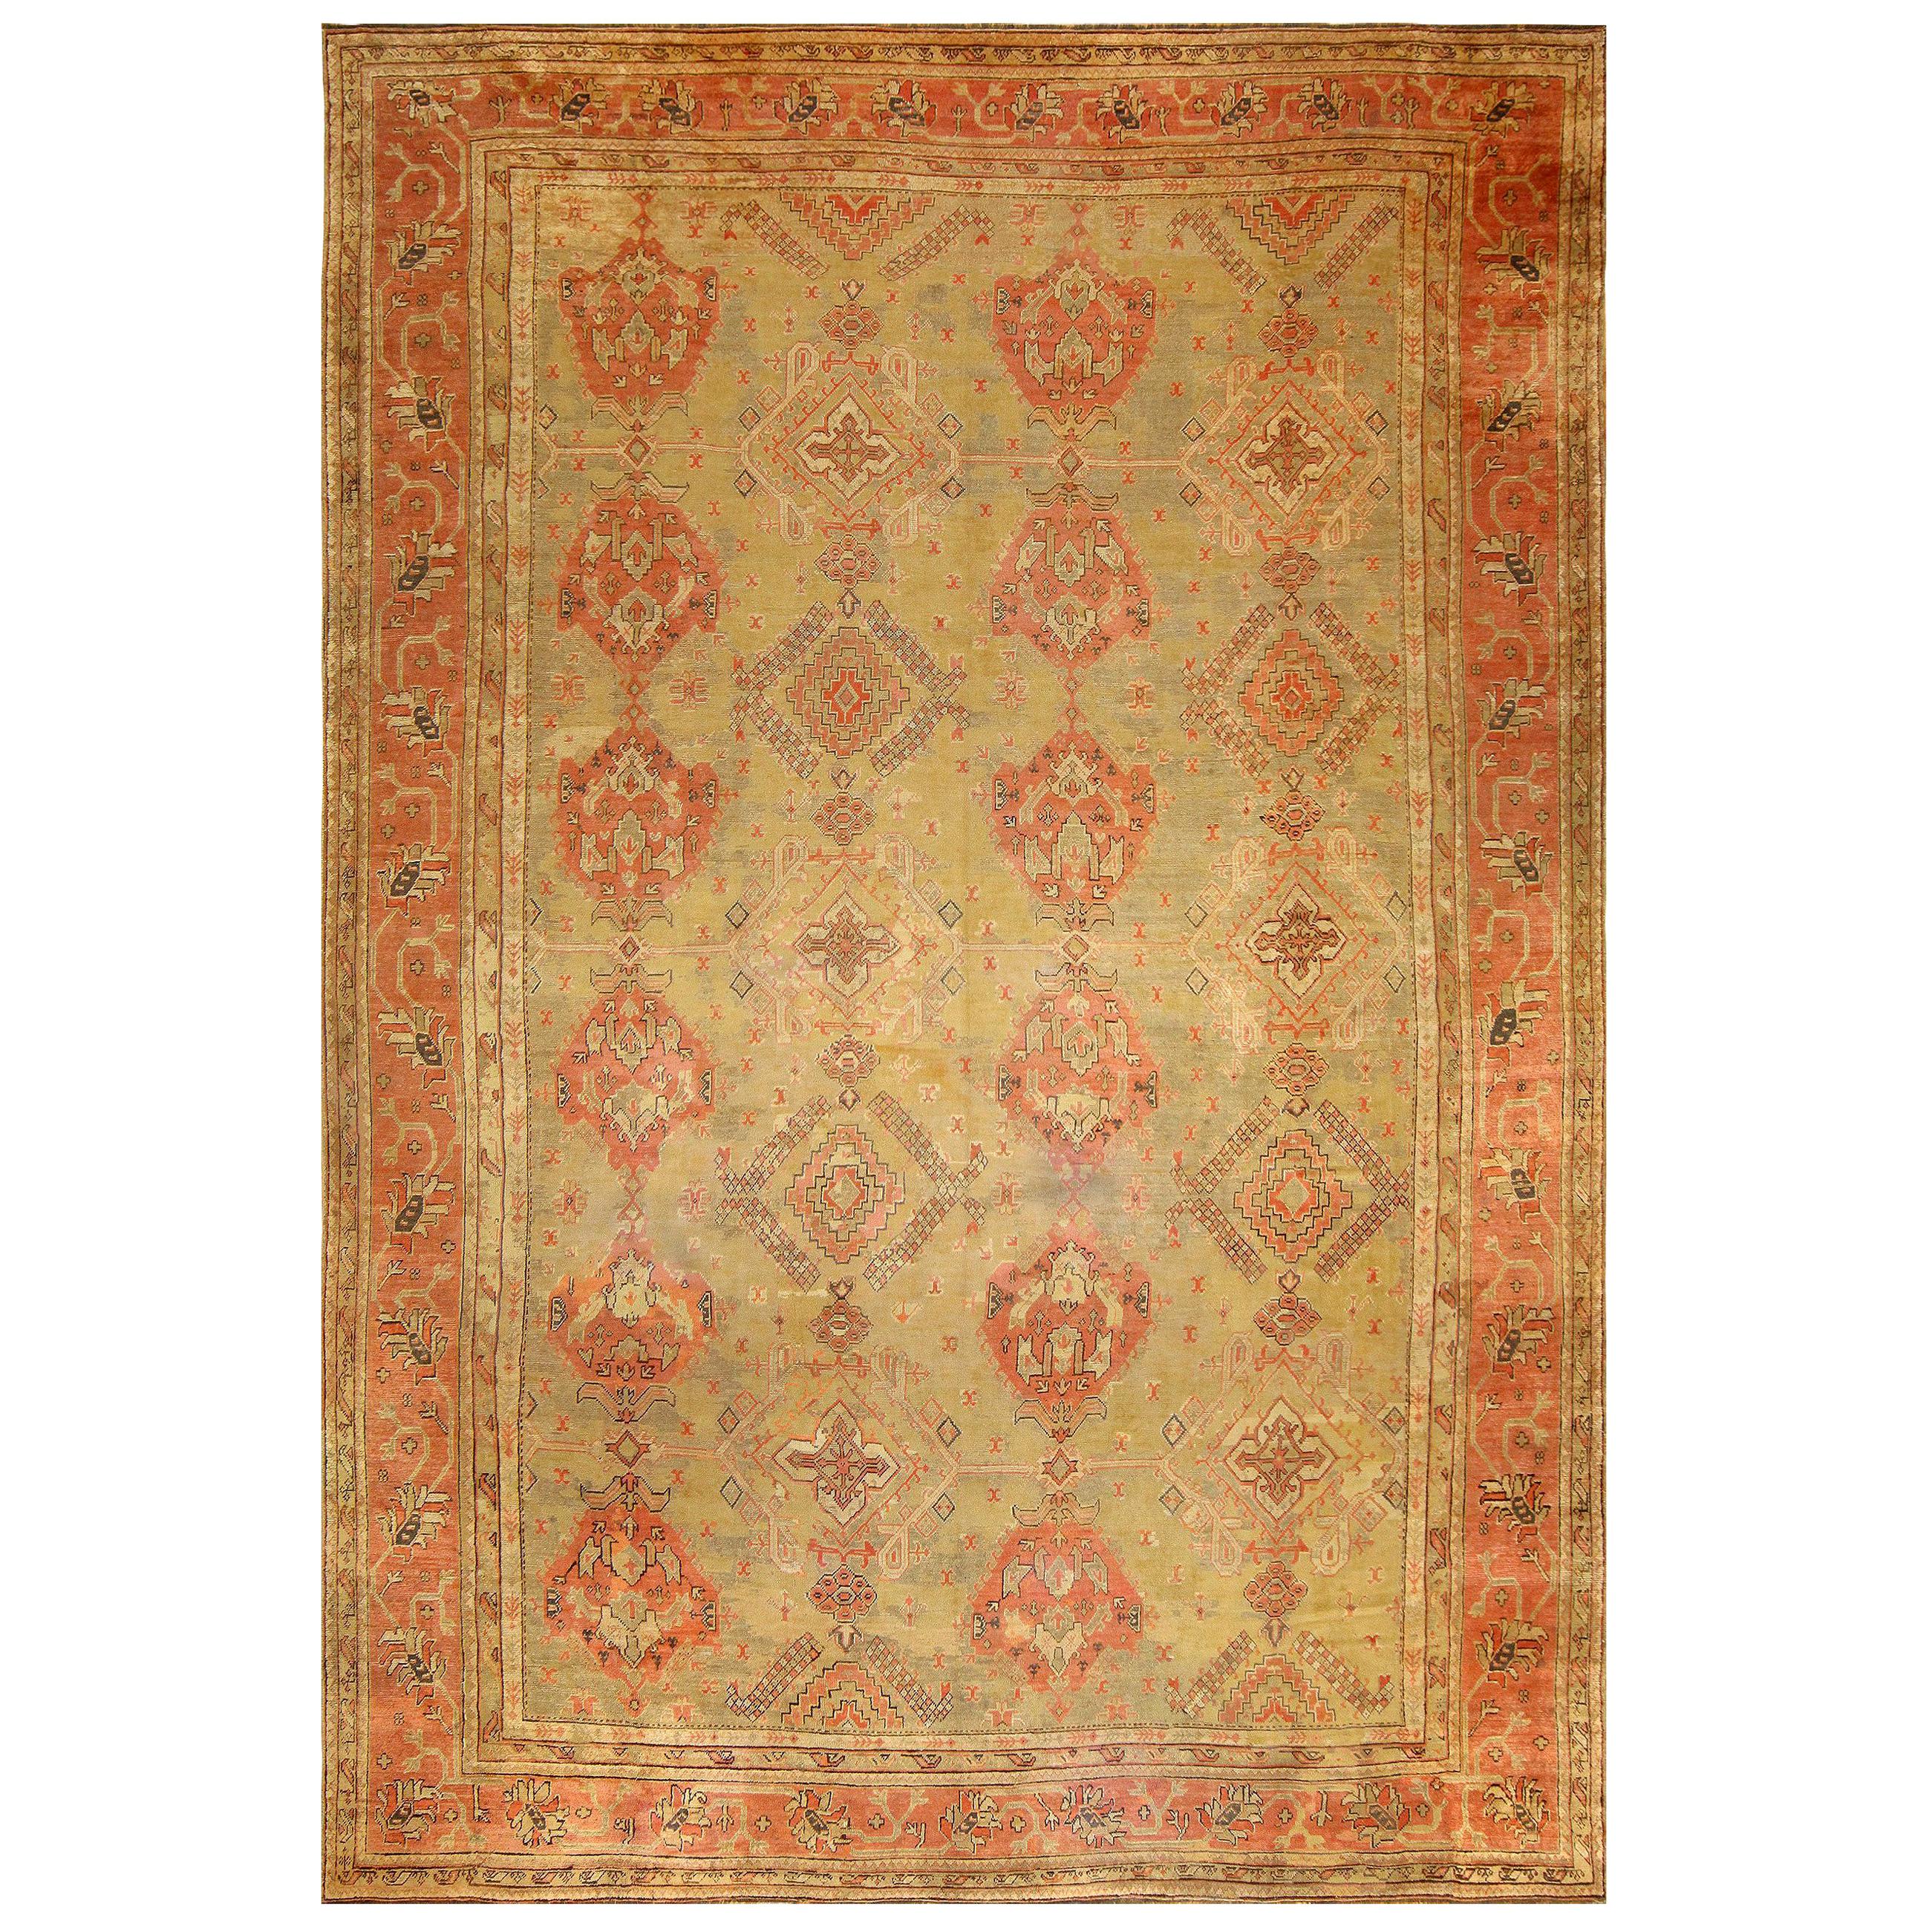 Antique Turkish Oushak Rug. Size: 16 ft 3 in x 24 ft 7 in 